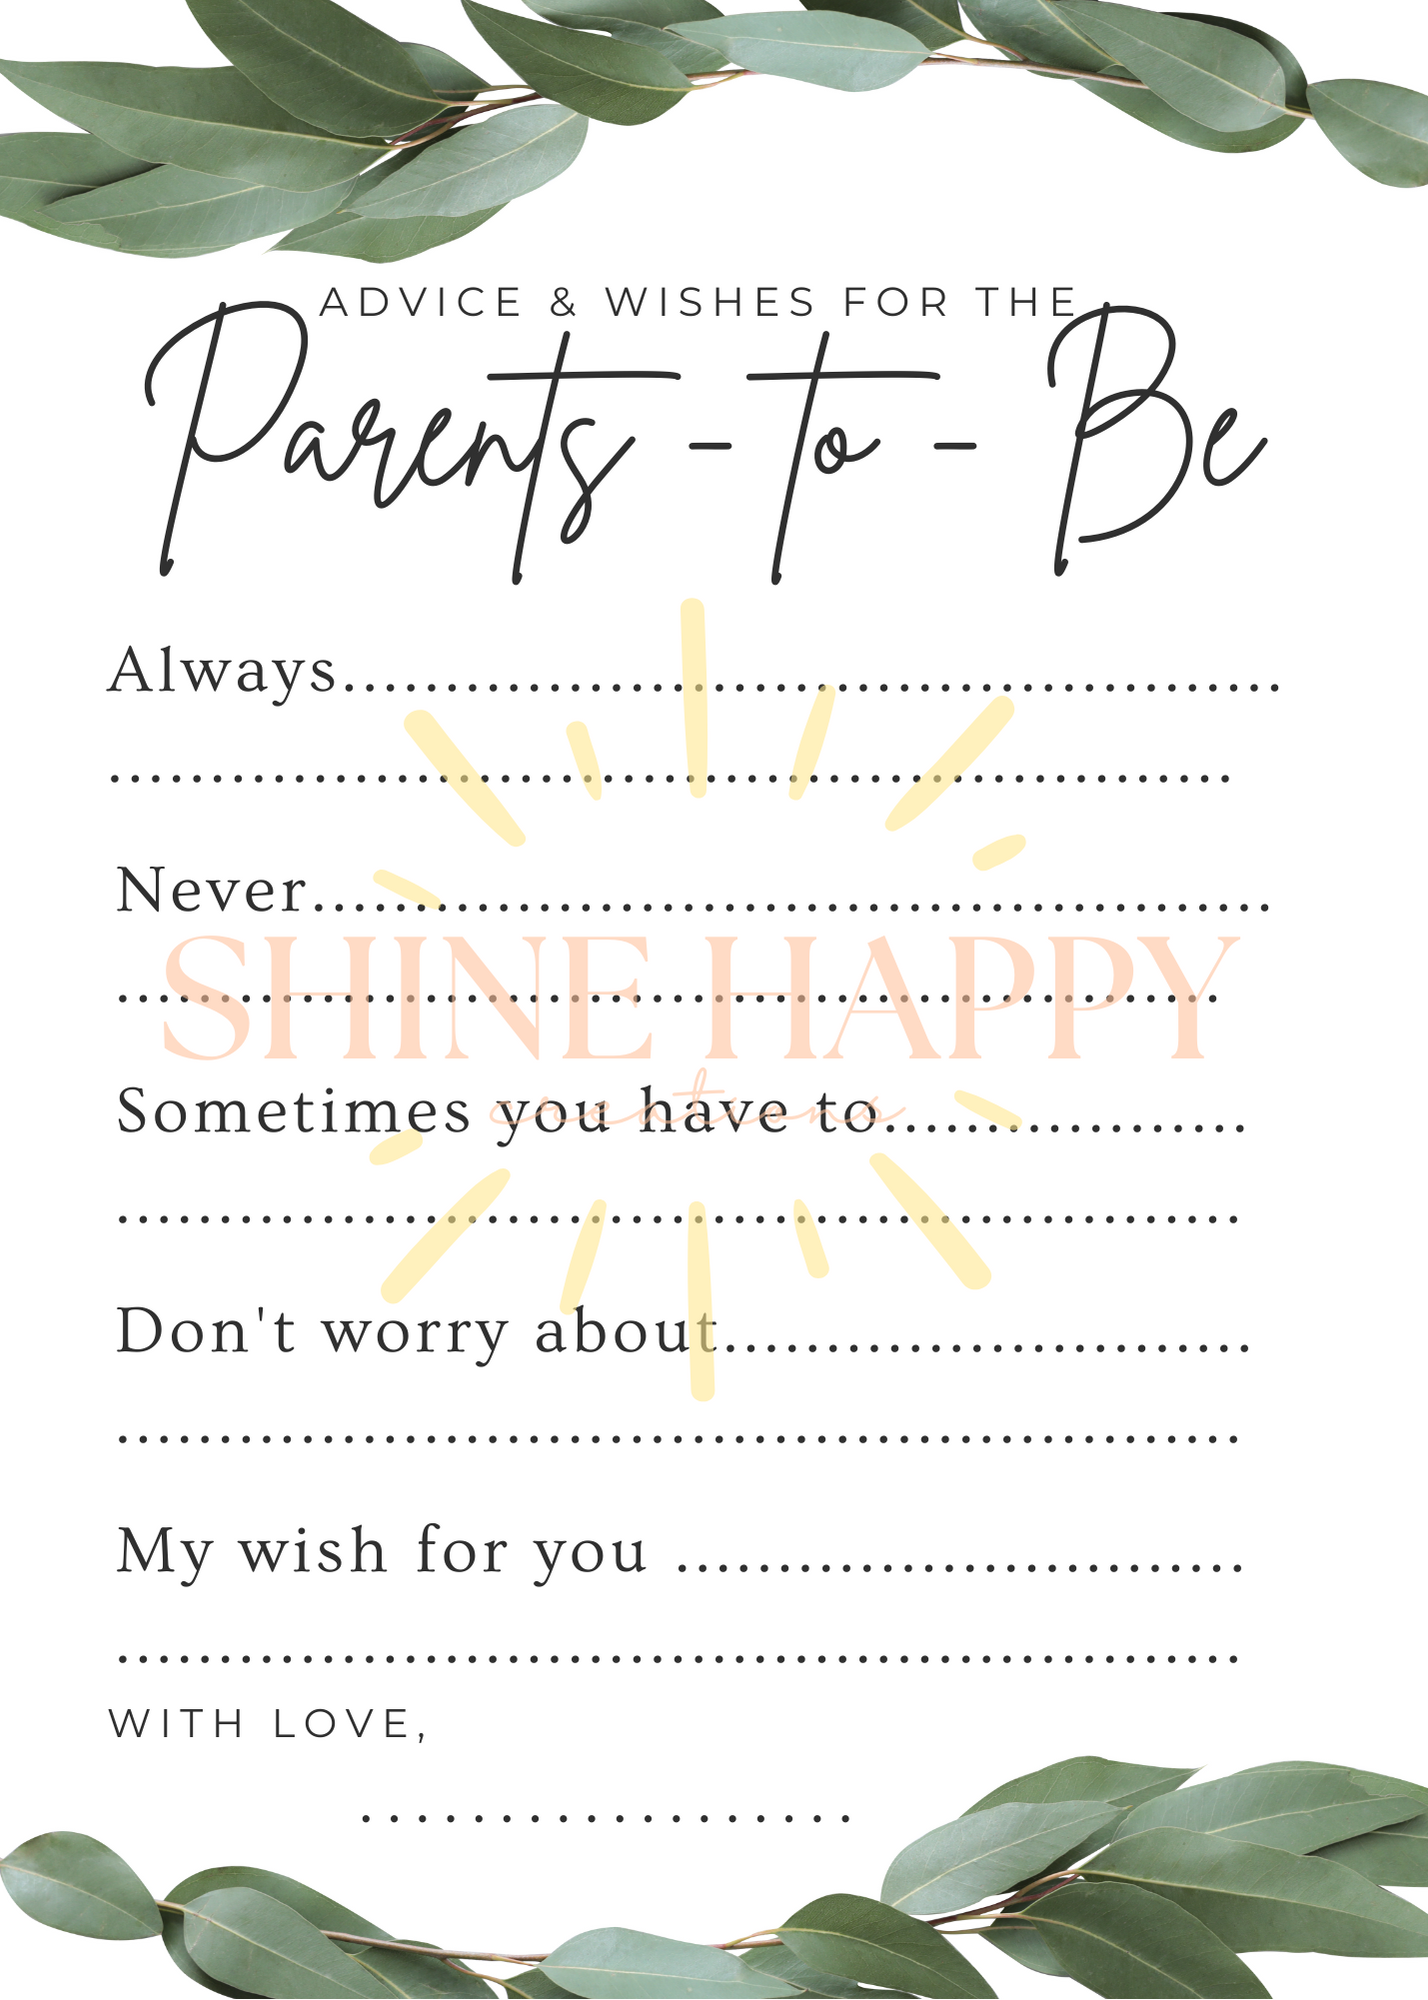 Baby Shower Guest Activity - Advice/Wishes - Simplistic with Greenery - DOWNLOADABLE (pdf) PRINTABLE